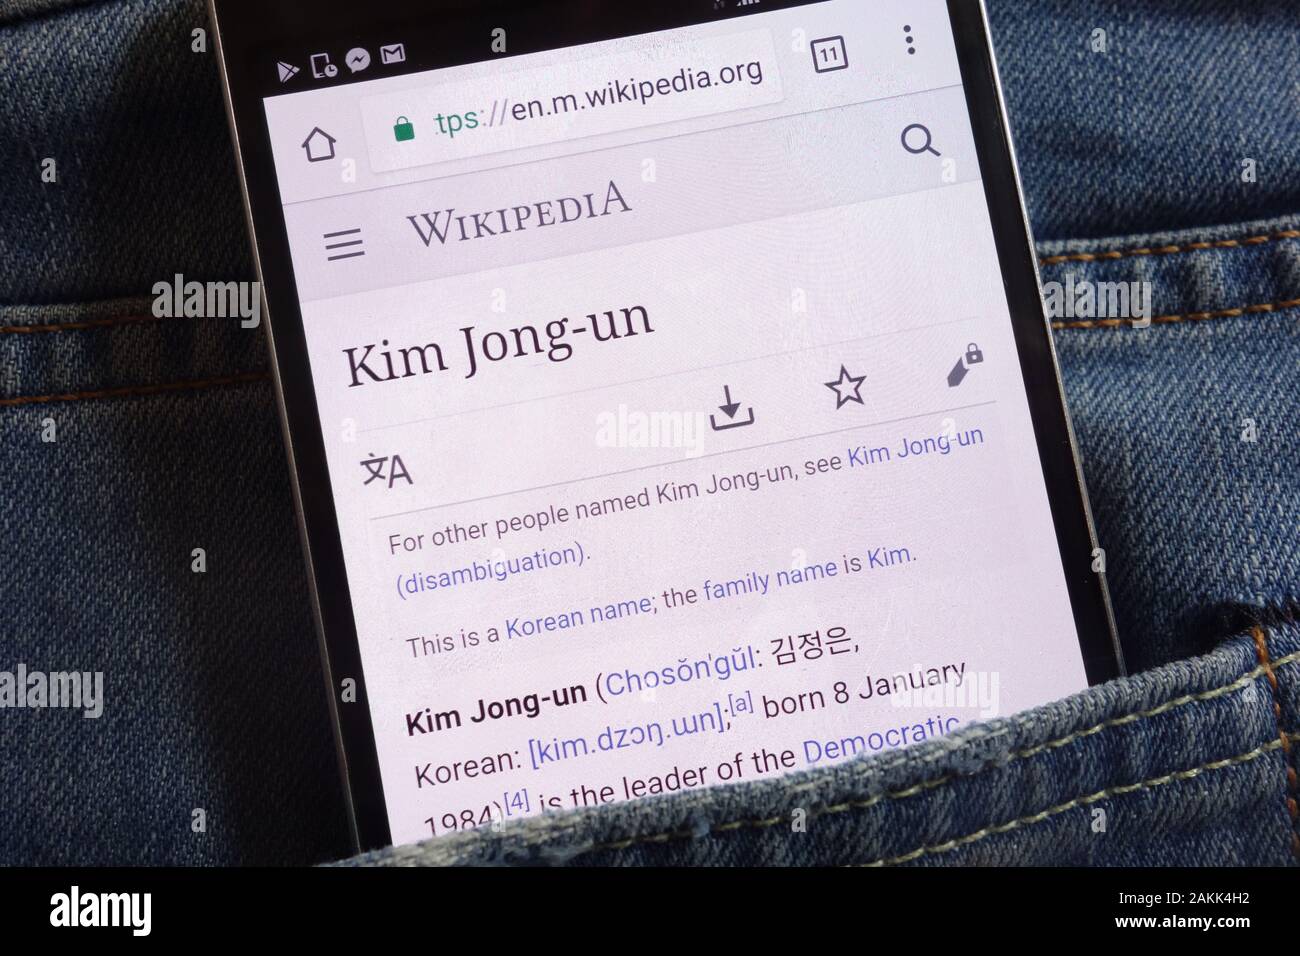 Informations about Kim Jong-un on Wikipedia website displayed on smartphone hidden in jeans pocket Stock Photo